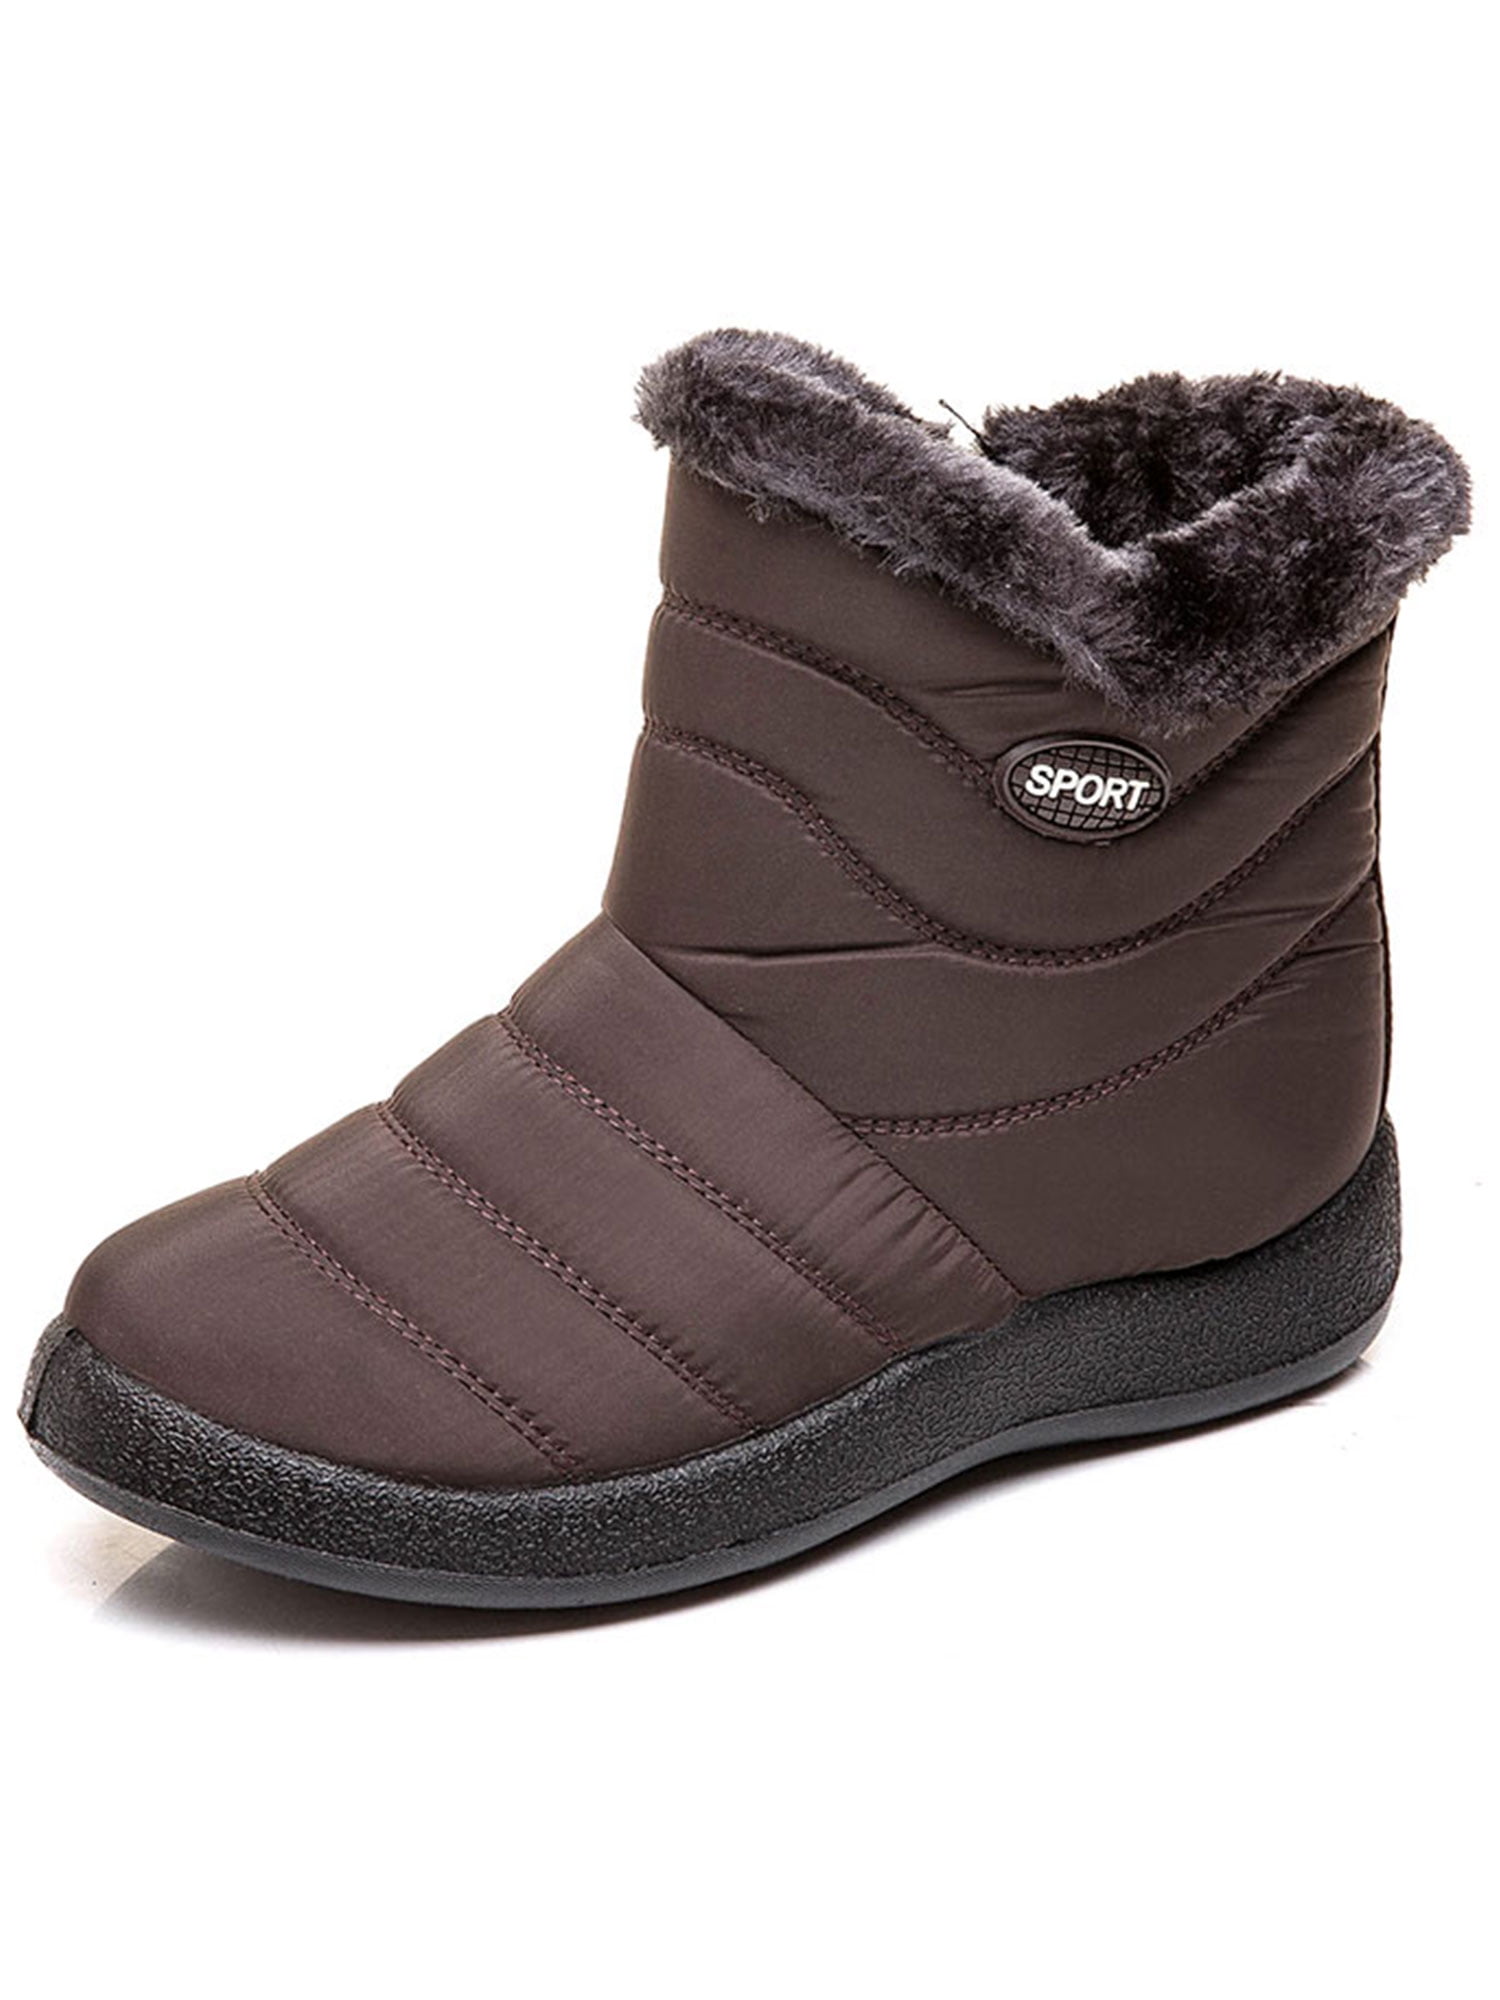 Details about   US Womne Slip On Winter Warm Ankle Boots Snow Booties Waterproof Fur Lined Shoes 